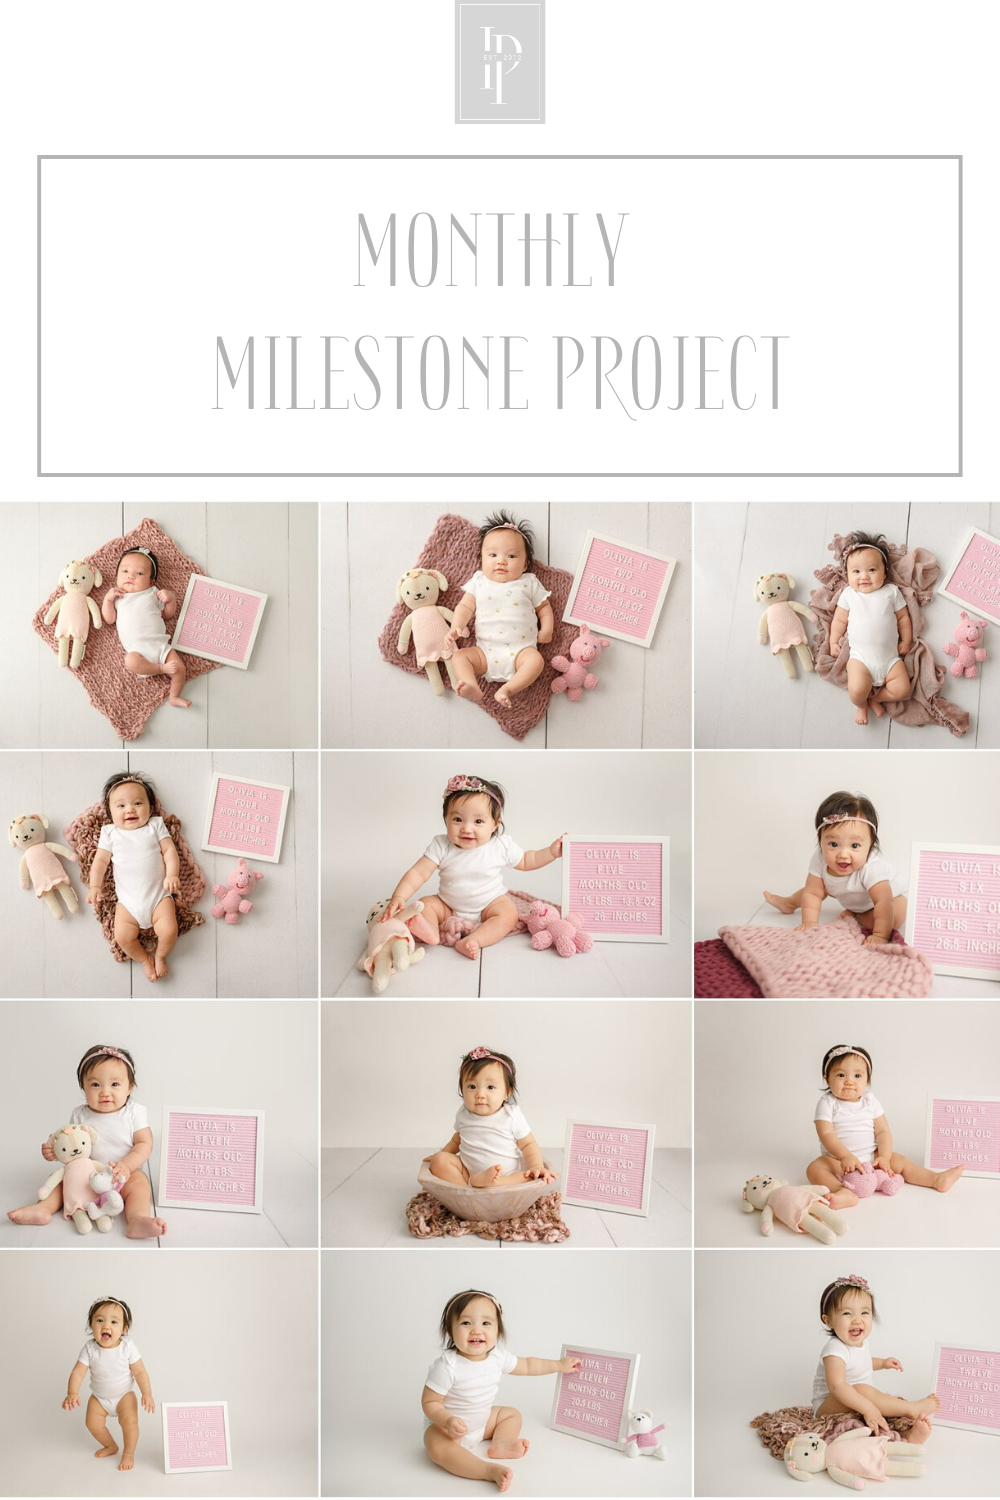 Monthly Milestone Project by Idalia Photography